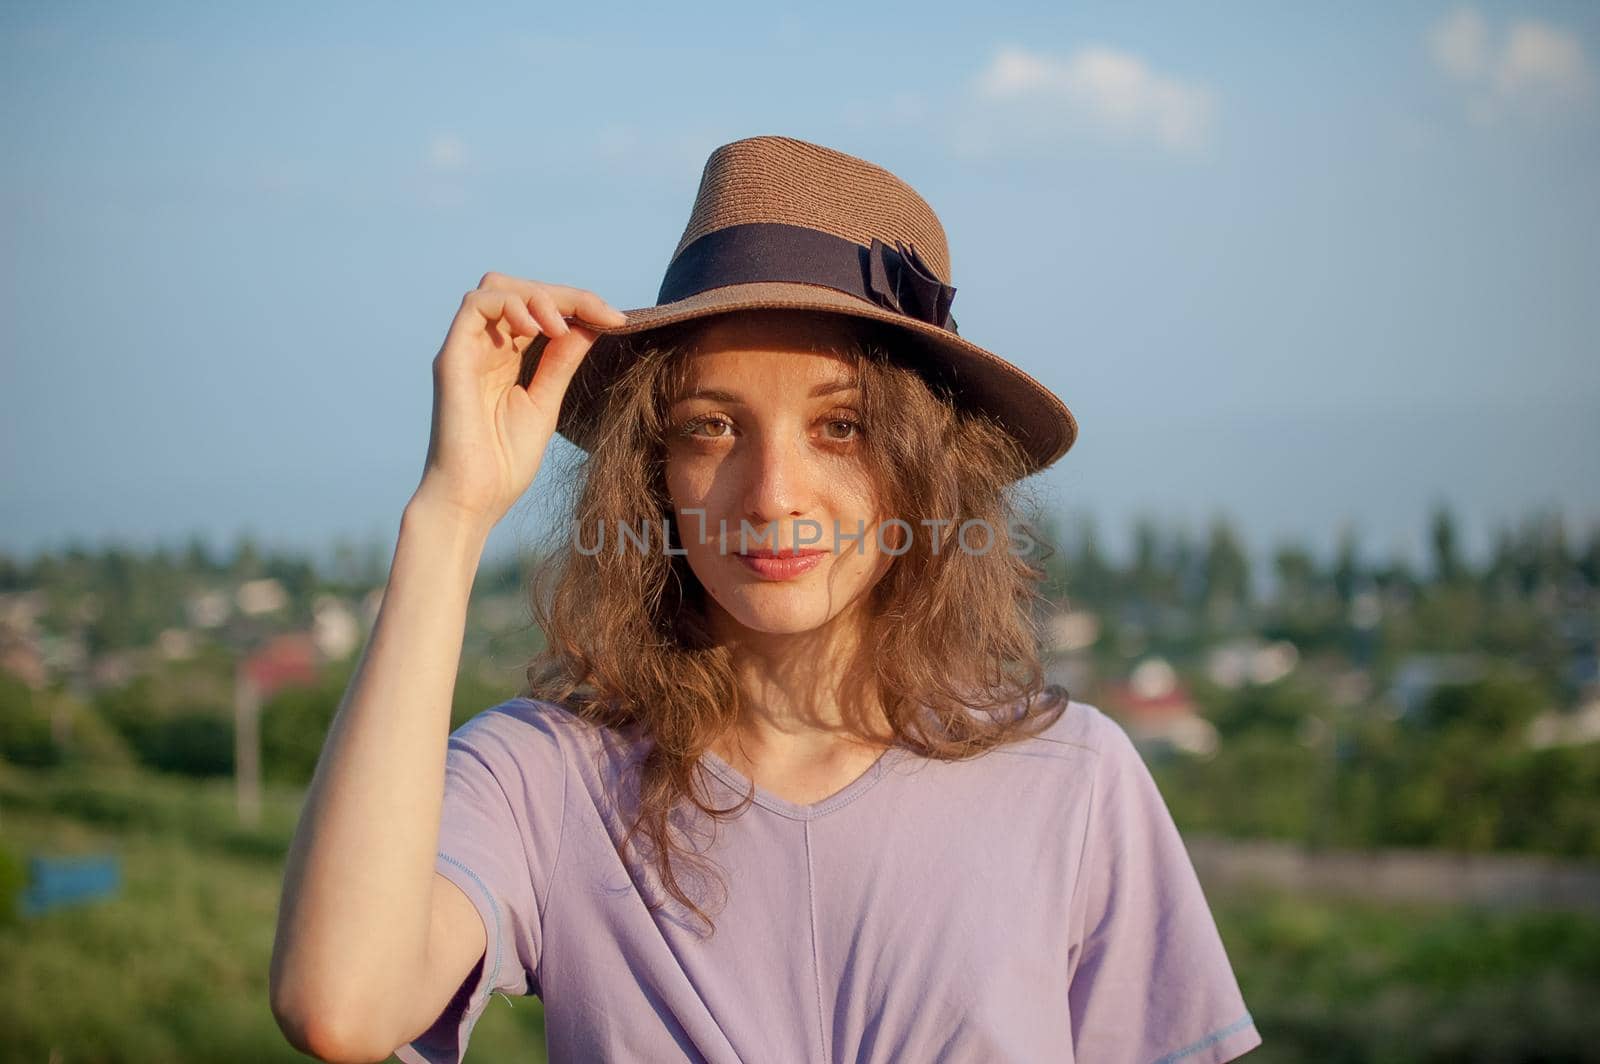 Young girl in dress is having great time during vacation in the summer on sky background in nature, travelling concept.